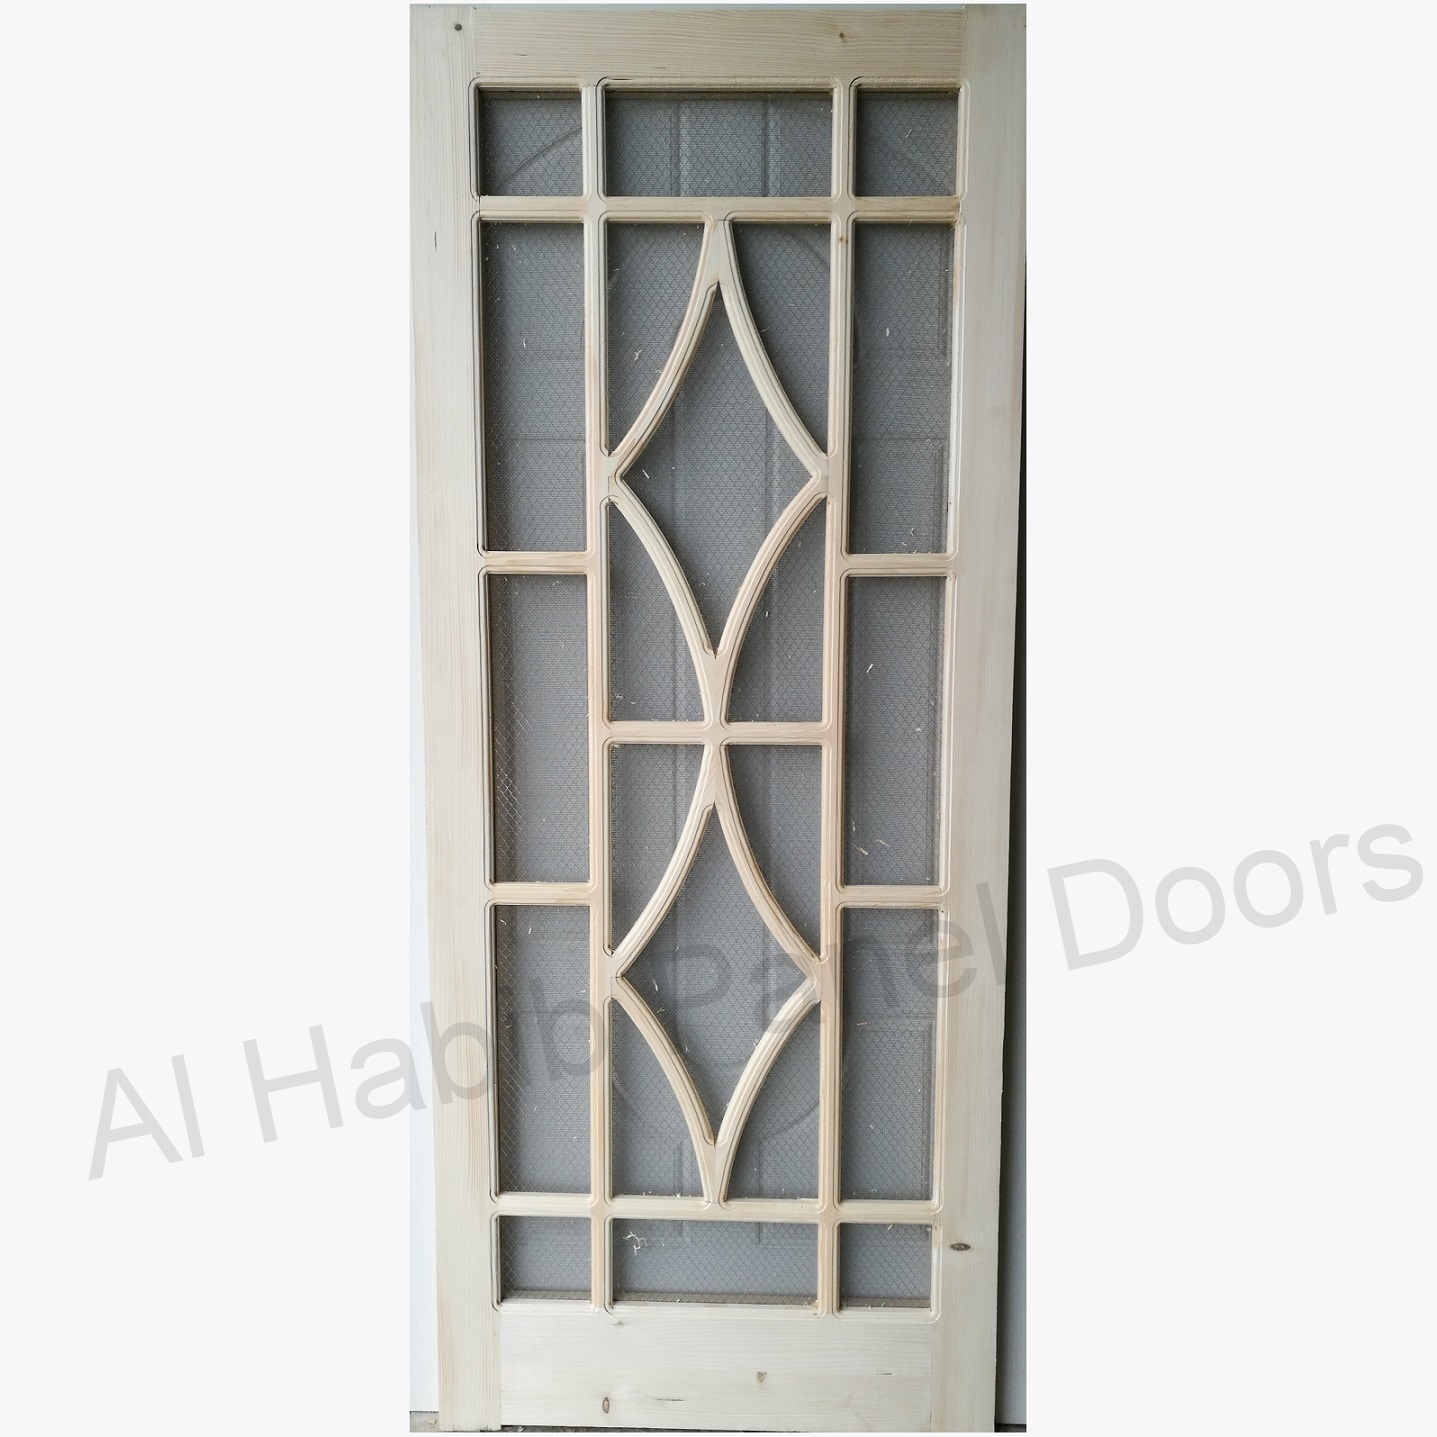 Imported Kail Wood Wire Mesh Door Diamond Design